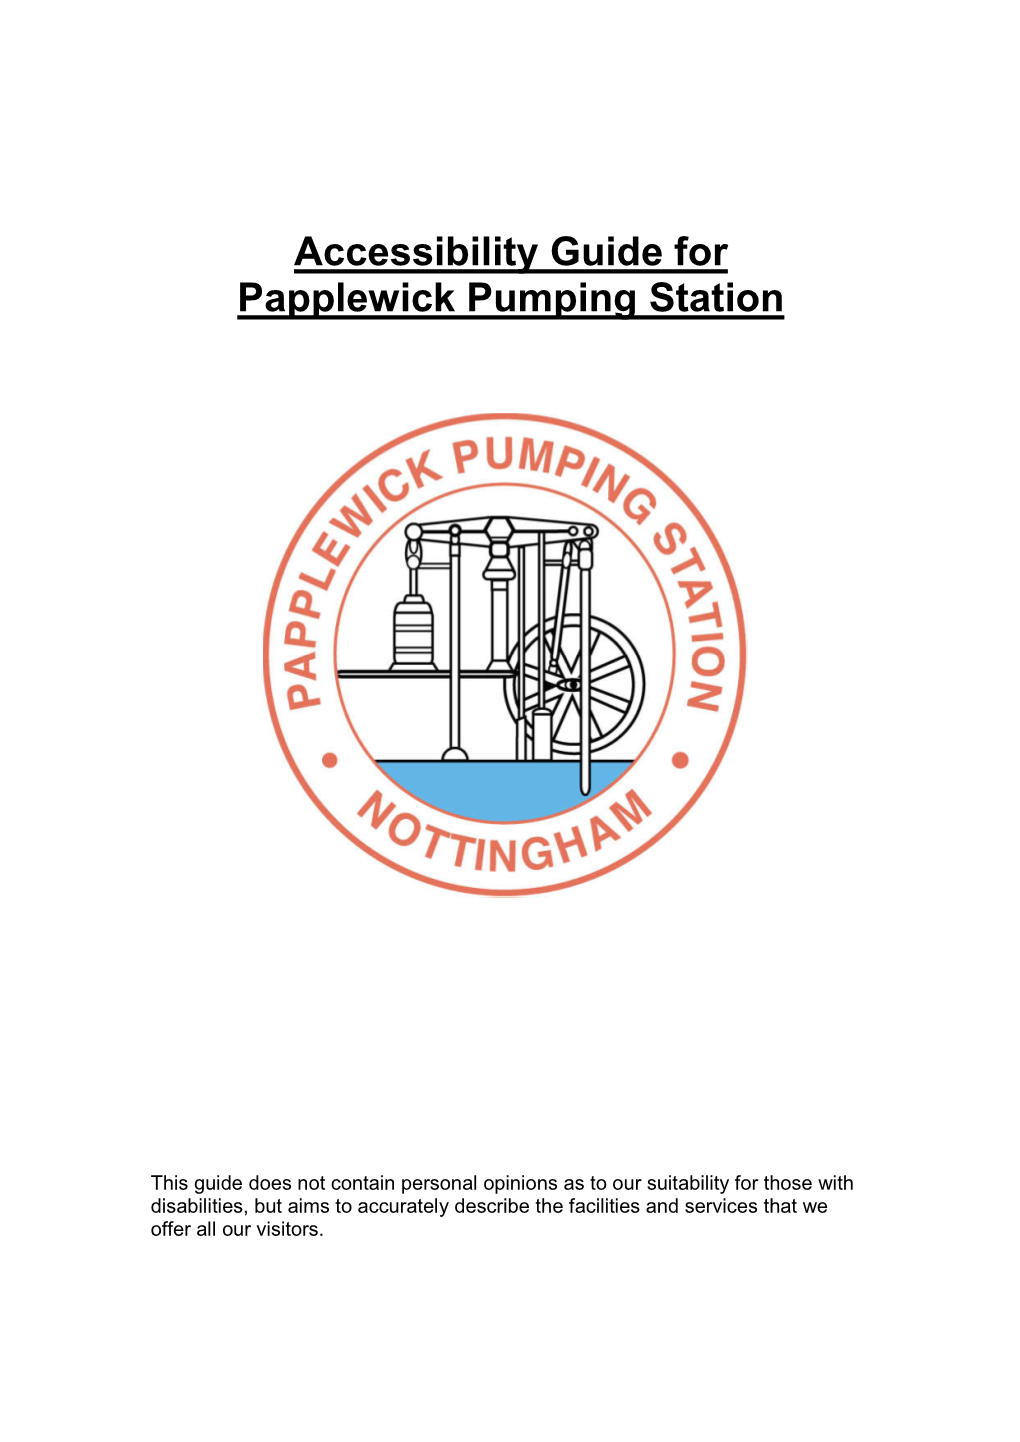 Accessibility Guide for Papplewick Pumping Station